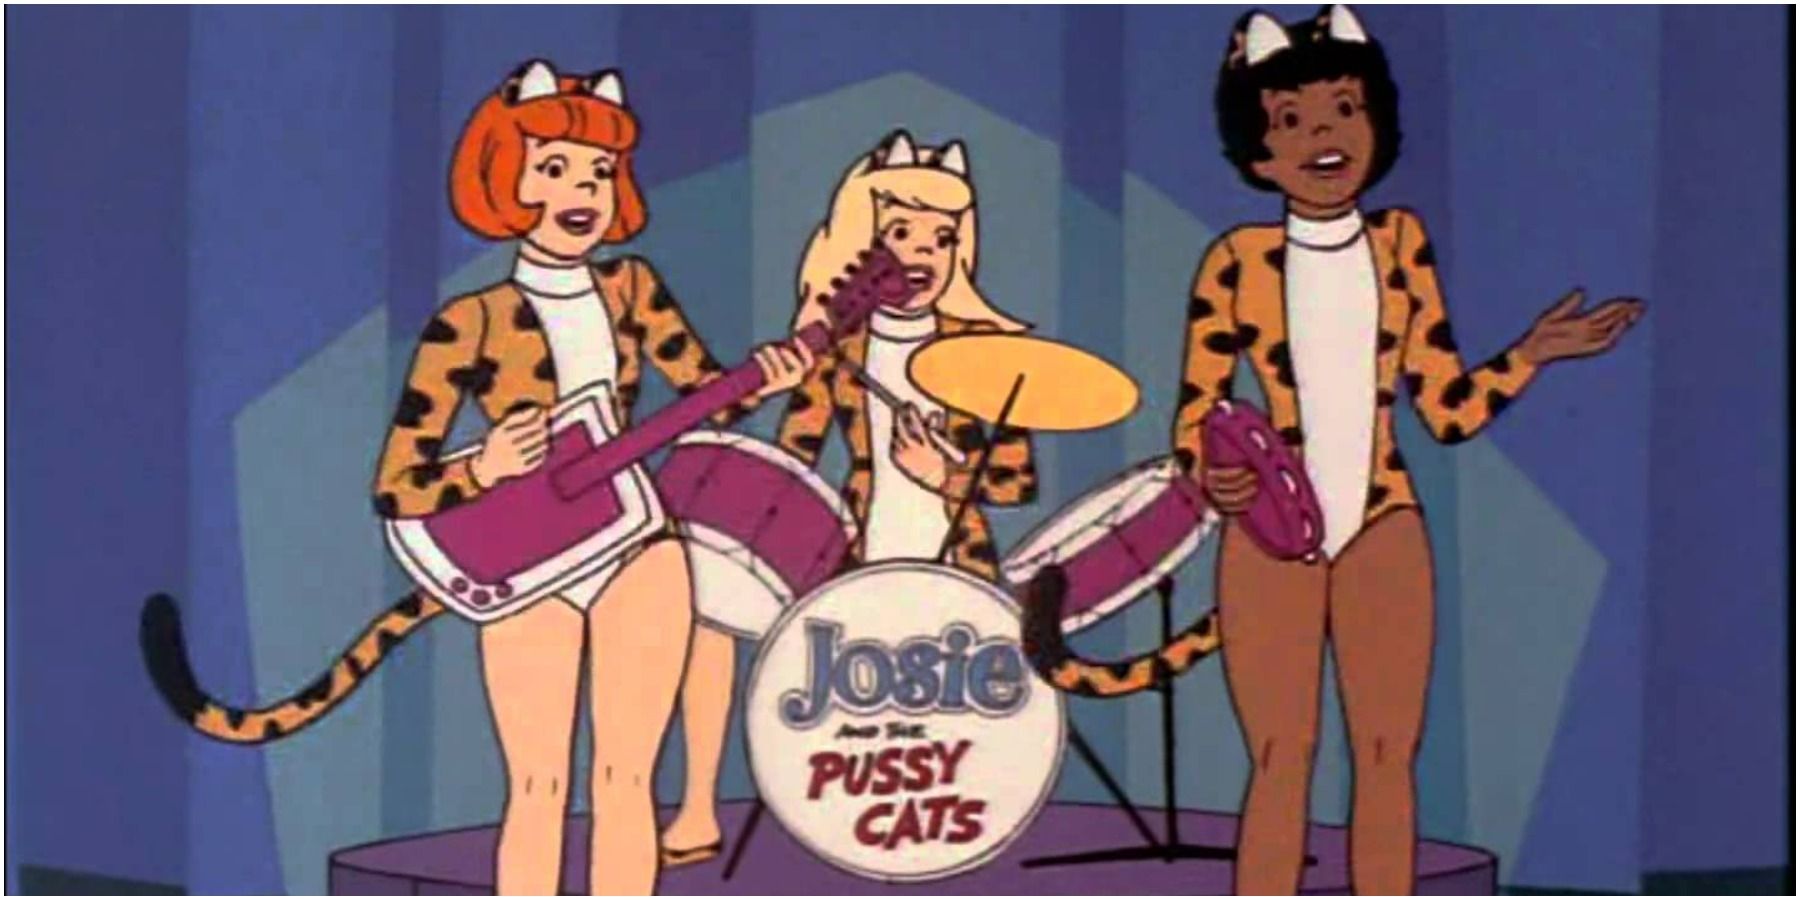 josie and the pussycats